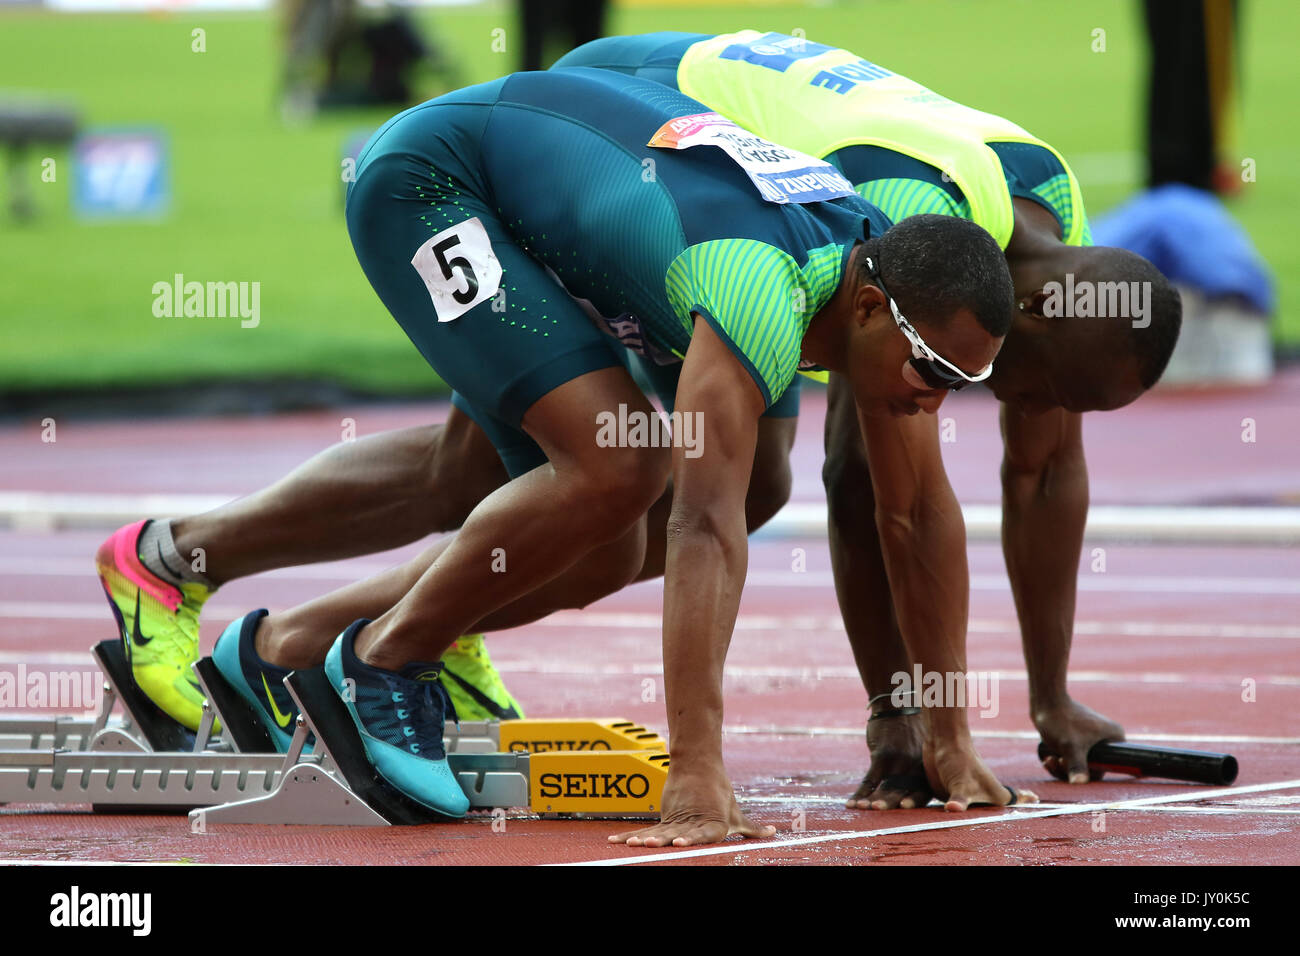 Ricardo COSTA de OLIVEIRA of Brazil in the Men's 4 x 100 m Relay T11-13 Final at the World Para Championships in London 2017 Stock Photo